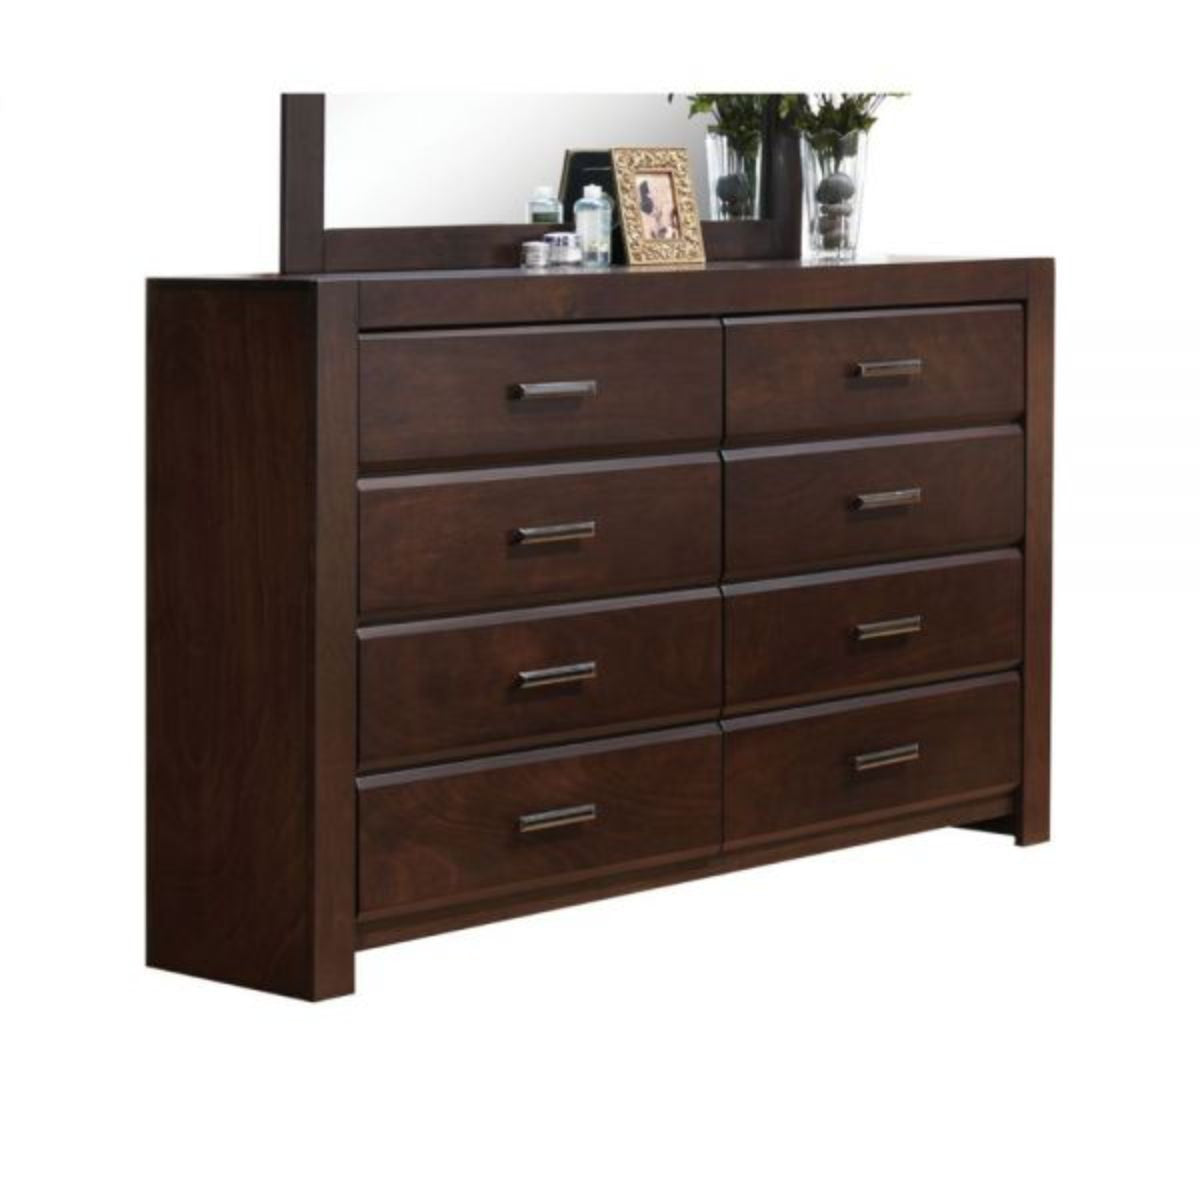 59" Brown Solid and Manufactured Wood Eight Drawer Double Dresser